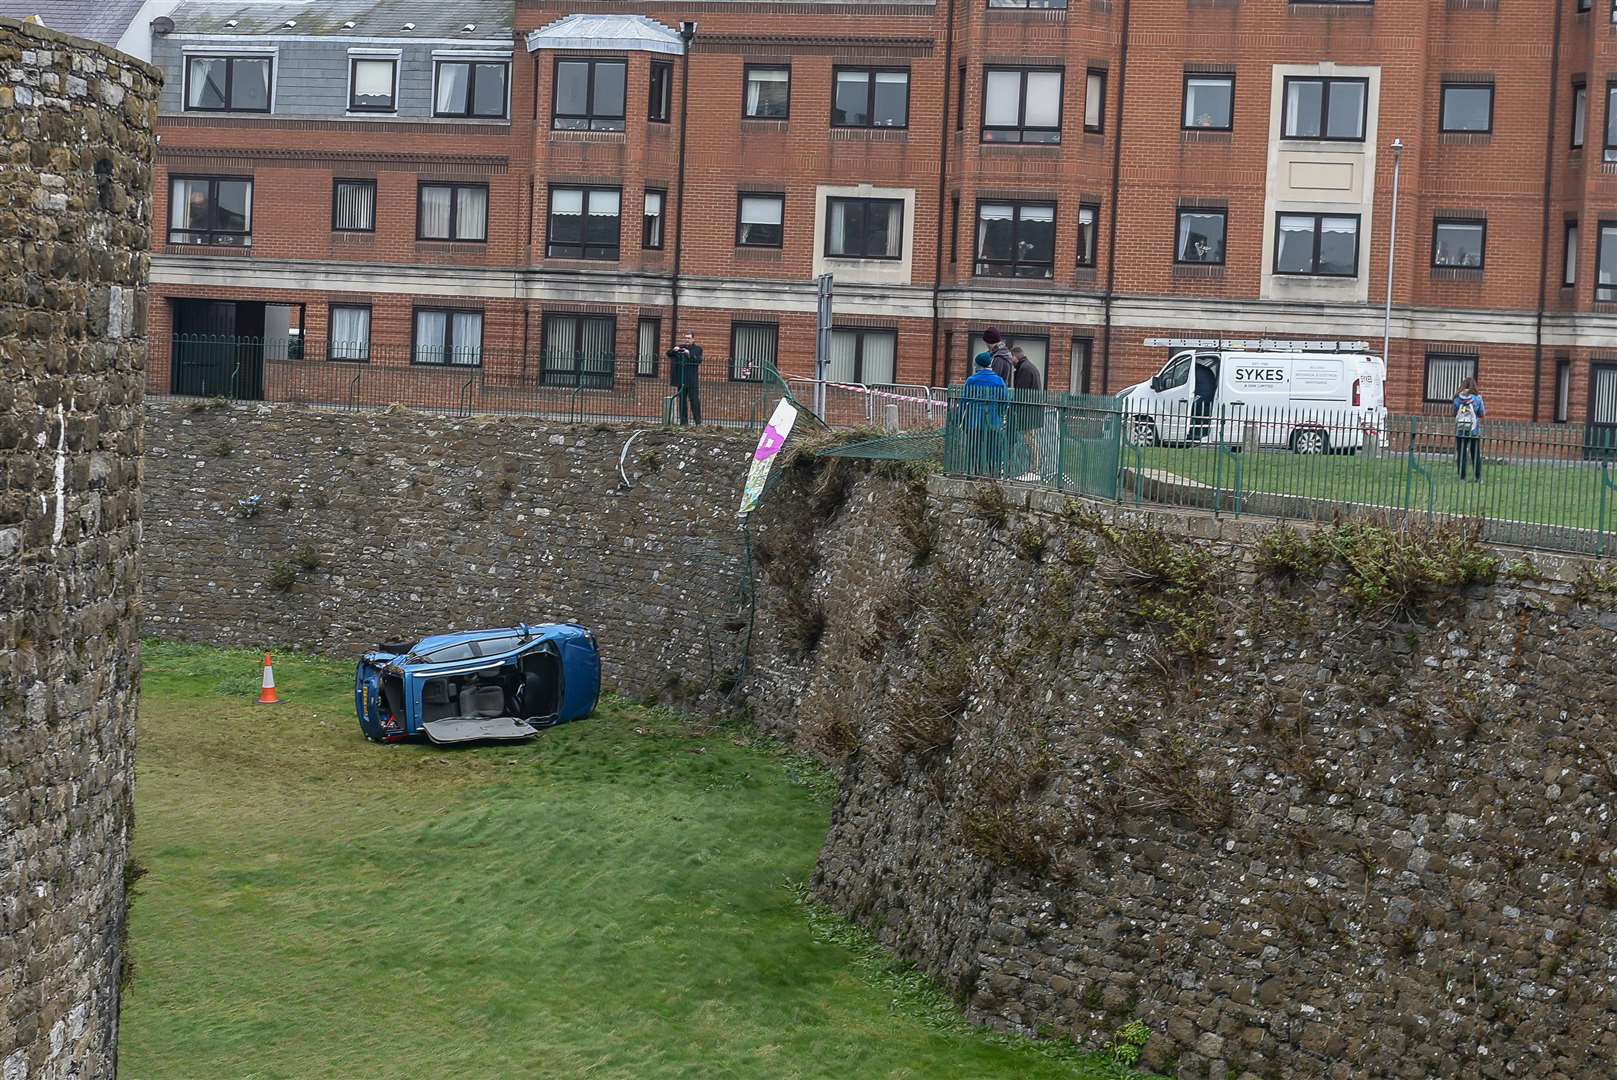 A car crashed through the railings and into the moat of Deal Castle